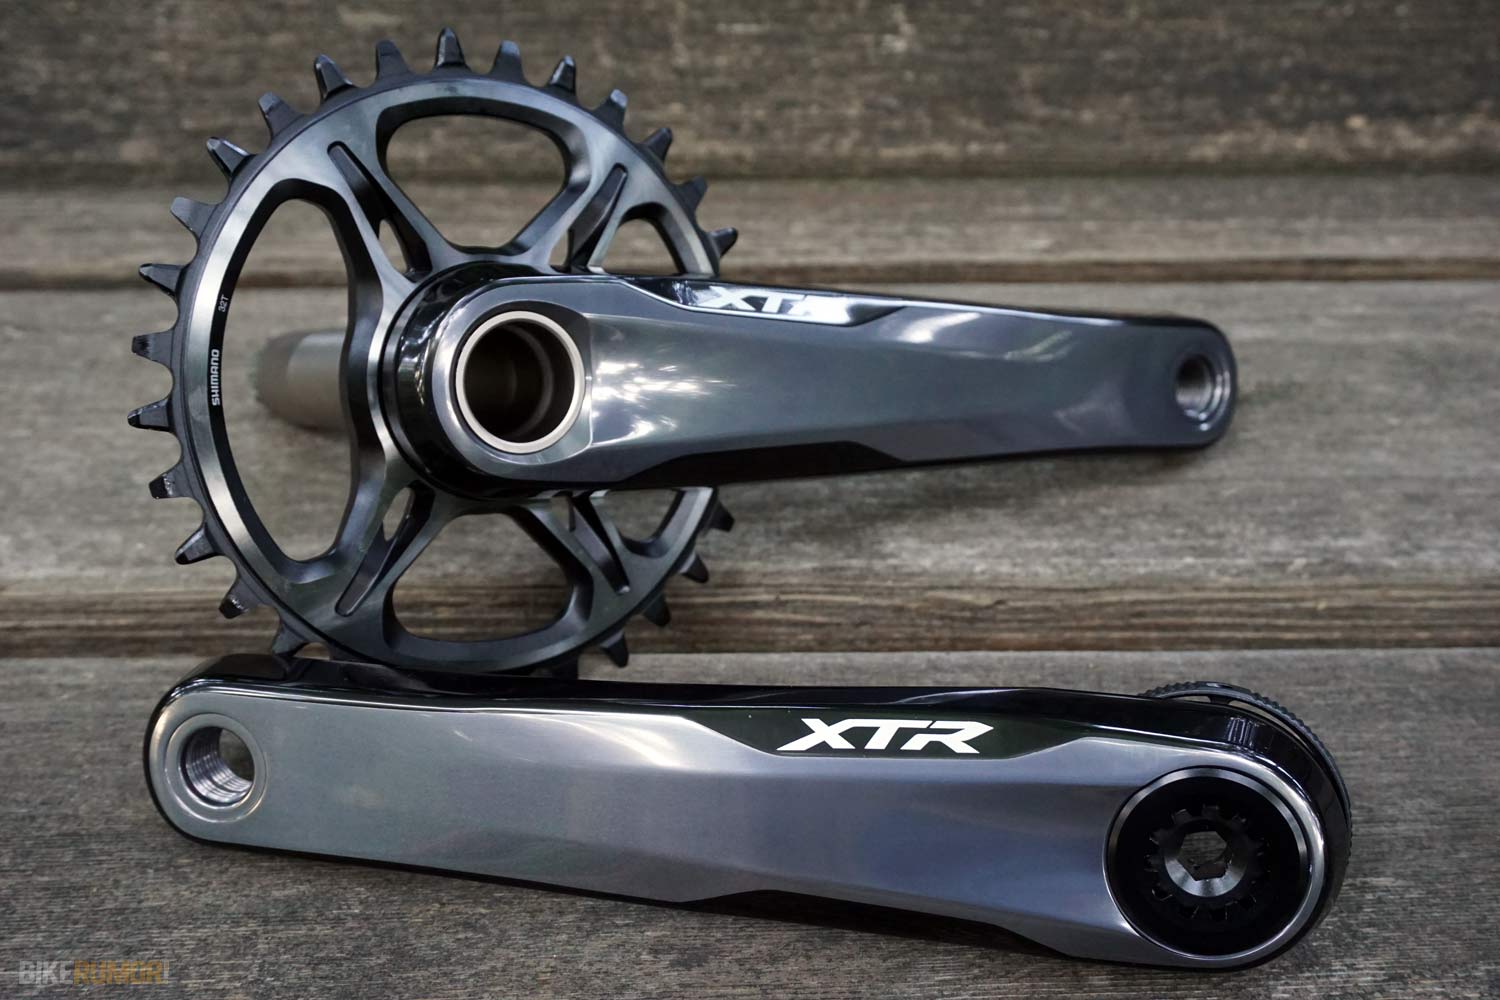 2019 Shimano XTR M9000 crankset and direct mount chainrings